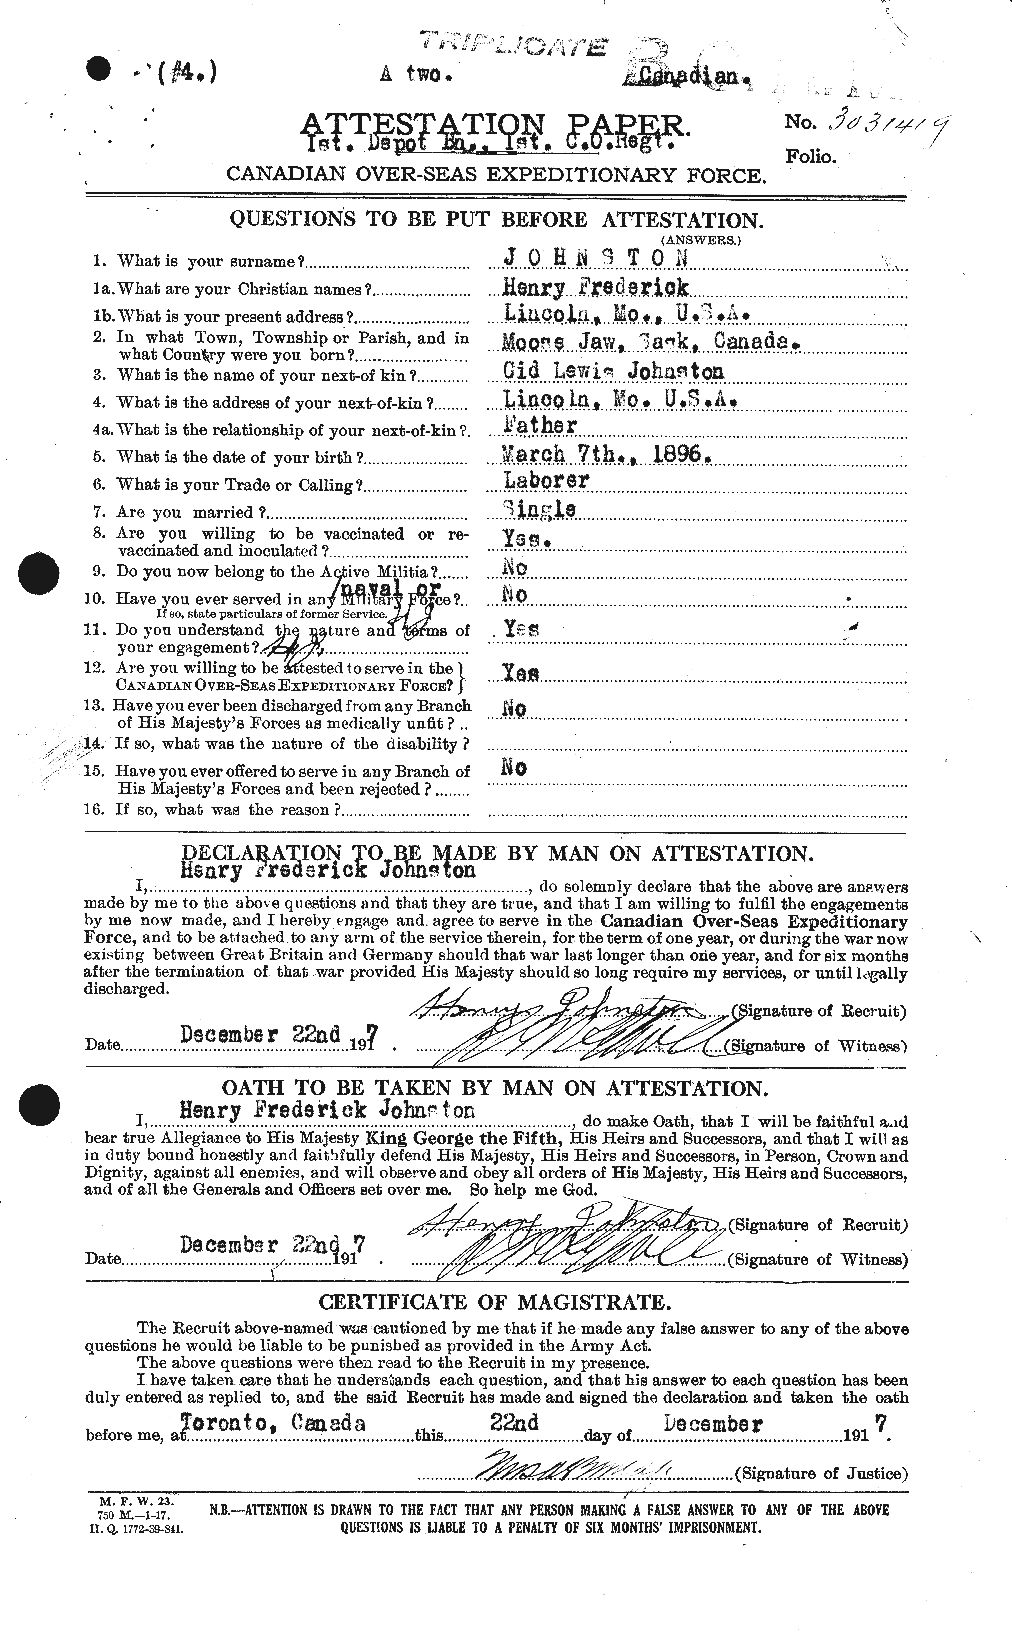 Personnel Records of the First World War - CEF 419541a